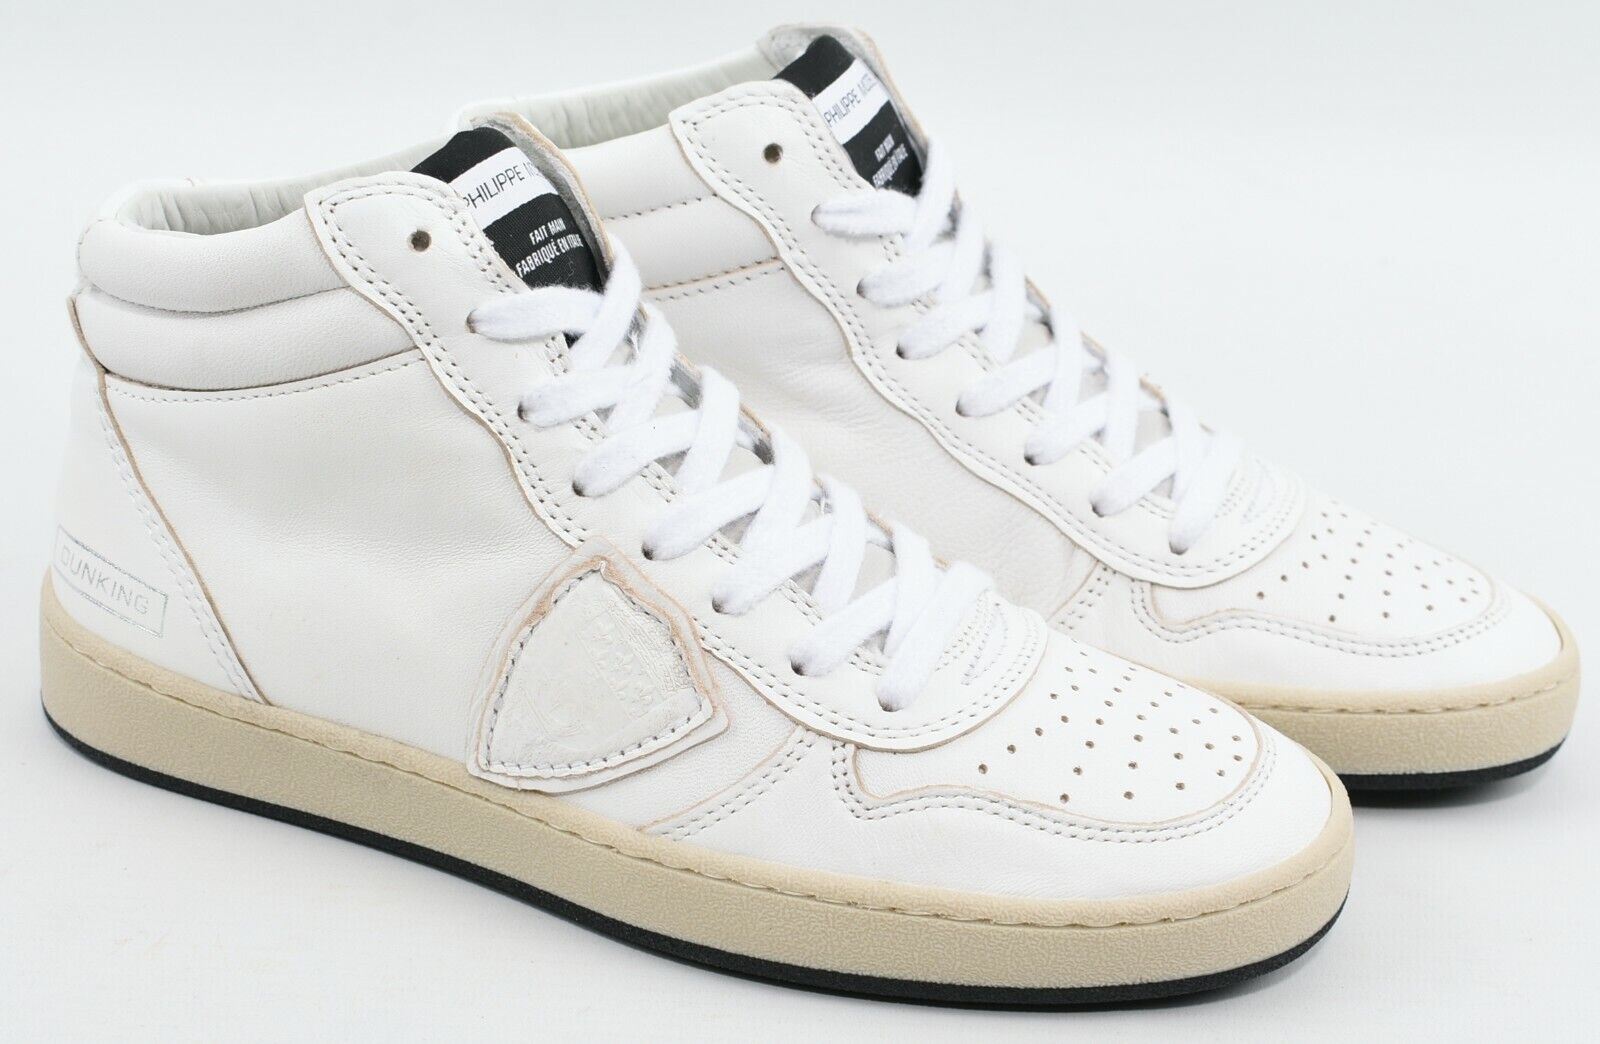 PHILIPPE MODEL Women's White Leather Mid Top Trainers, size UK 3 / EU 36